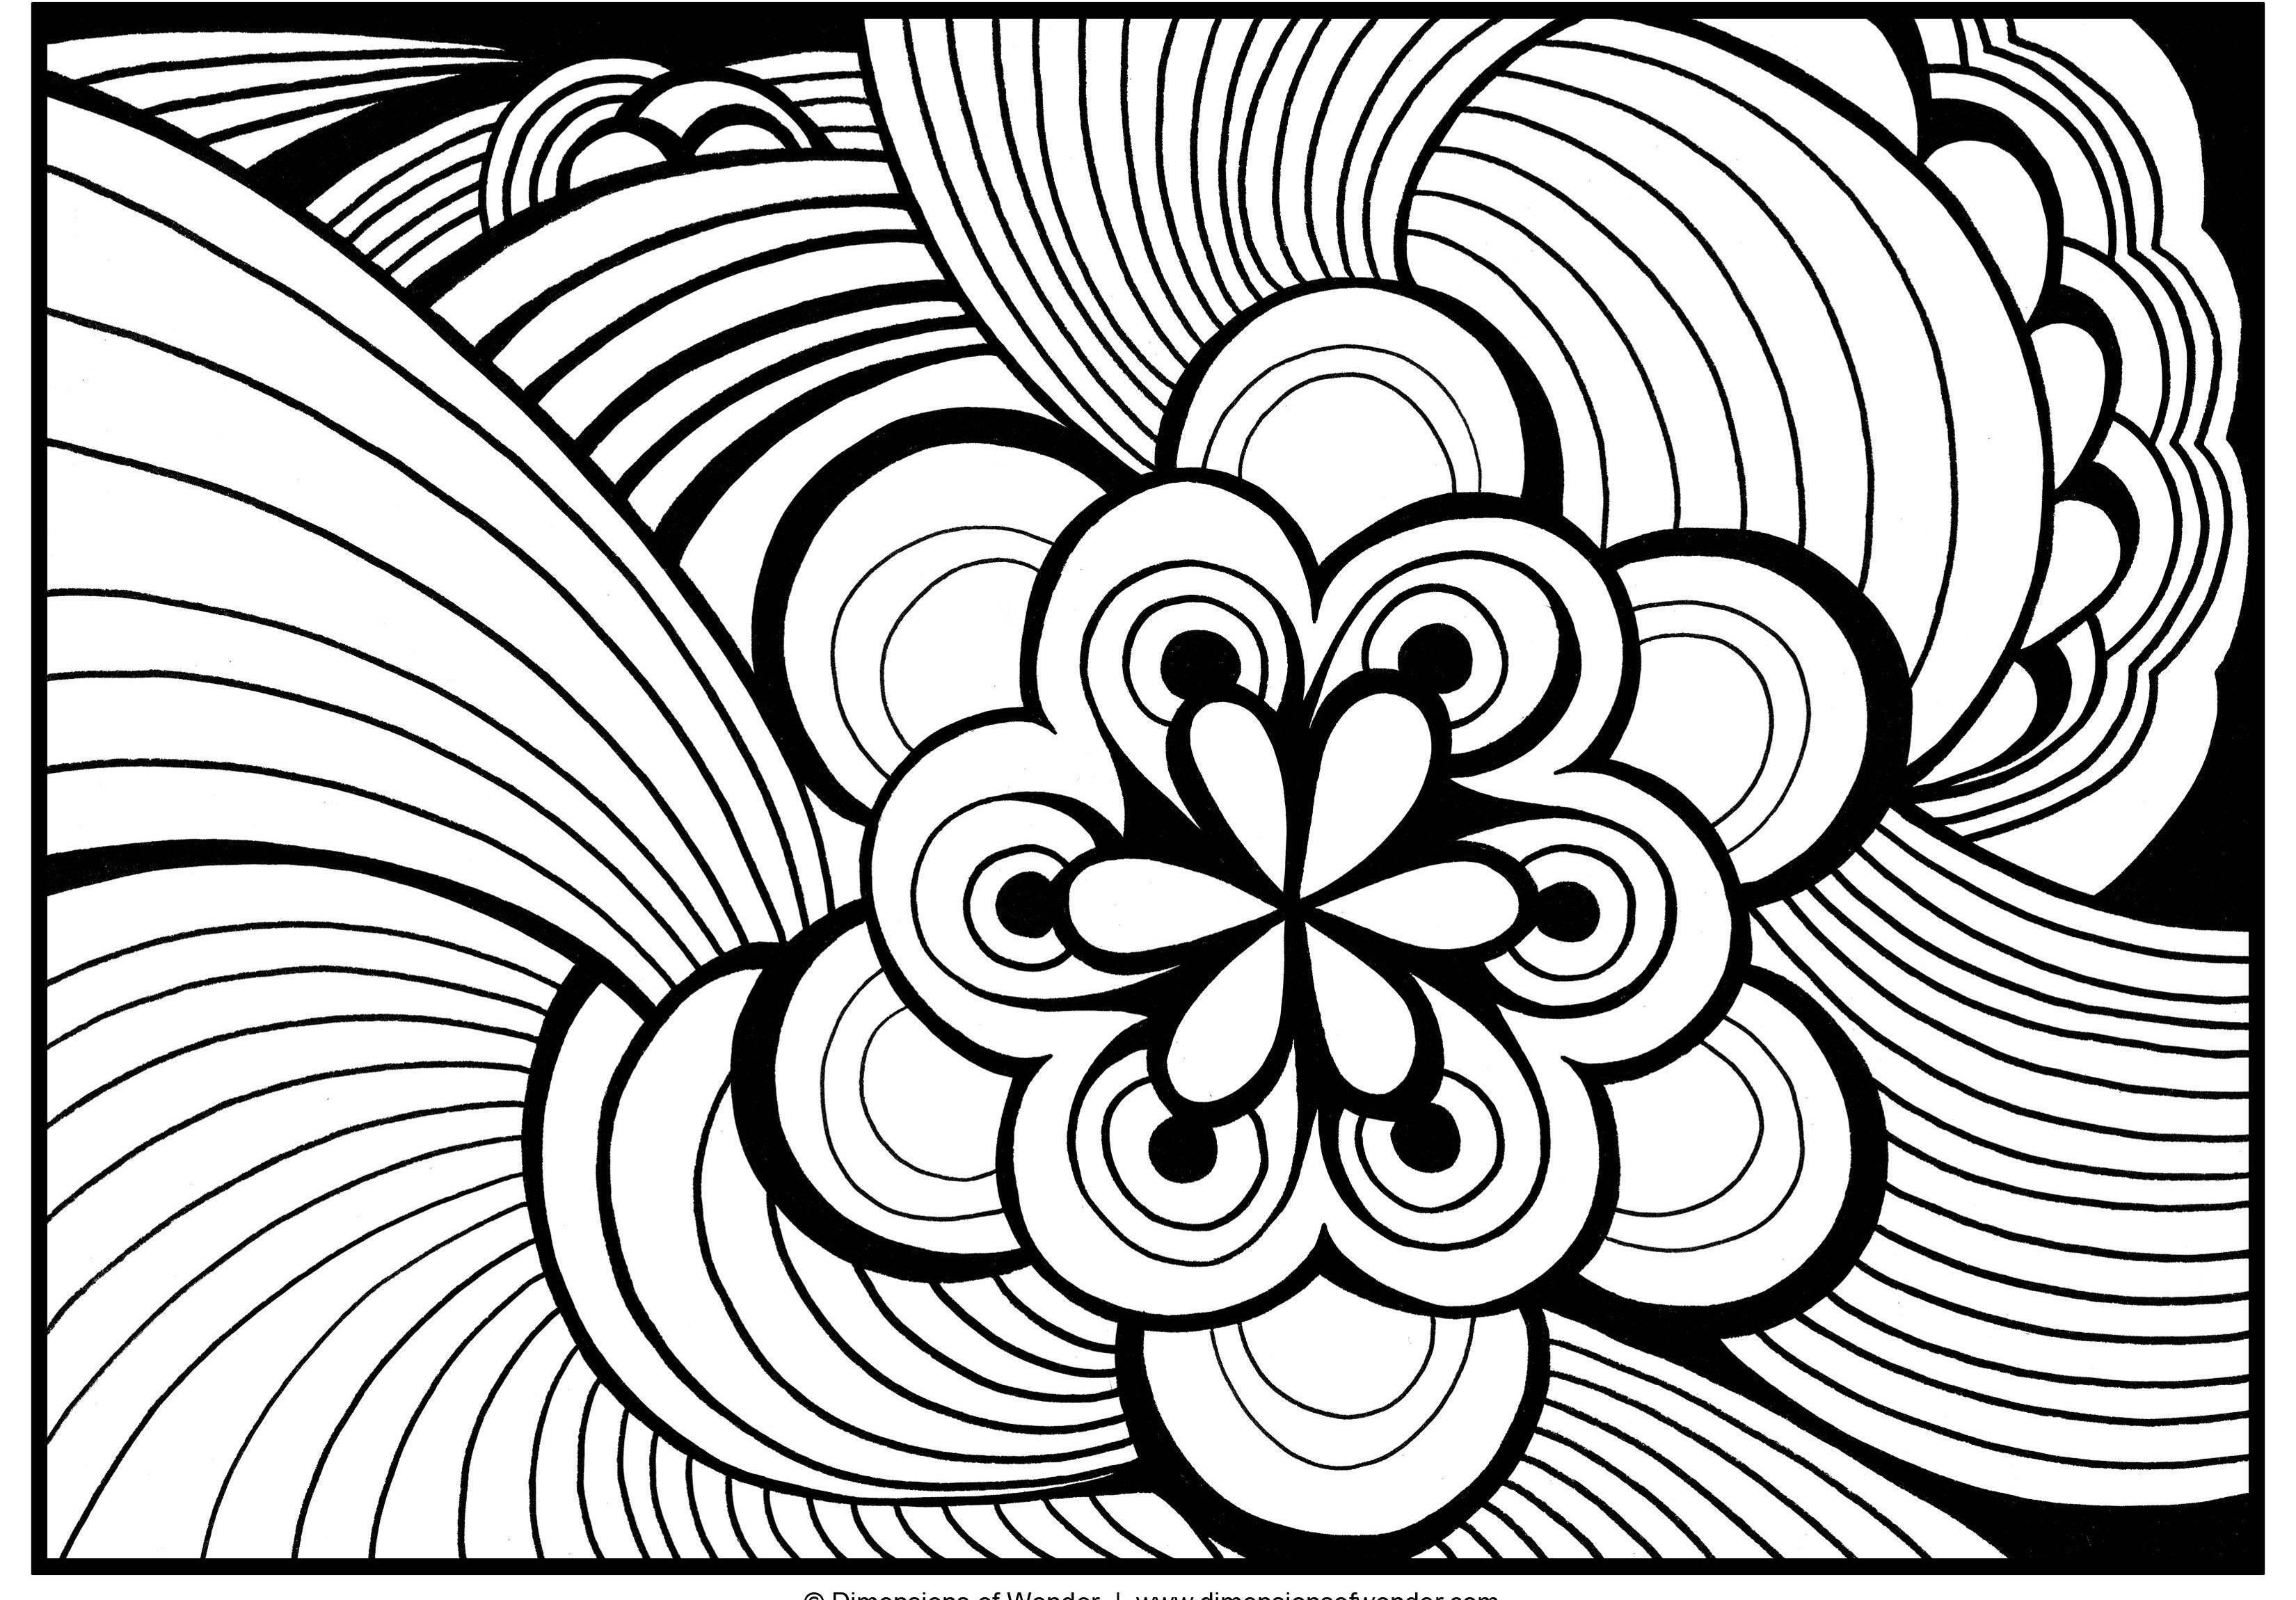 Printable Coloring Pages For Adults Abstract.